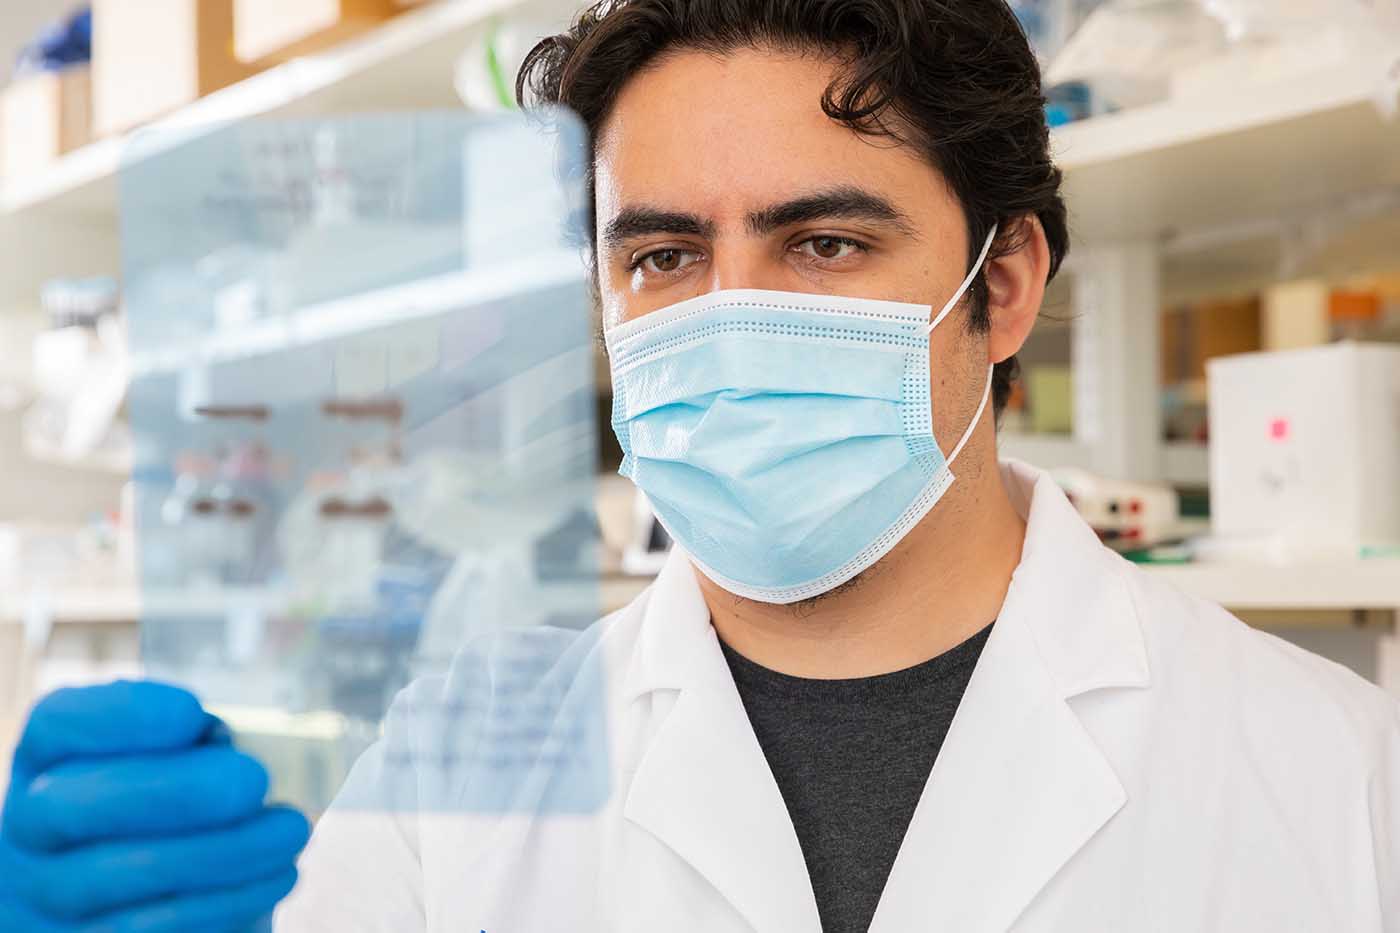 Man in lab coat and mask looks at translucent sheet